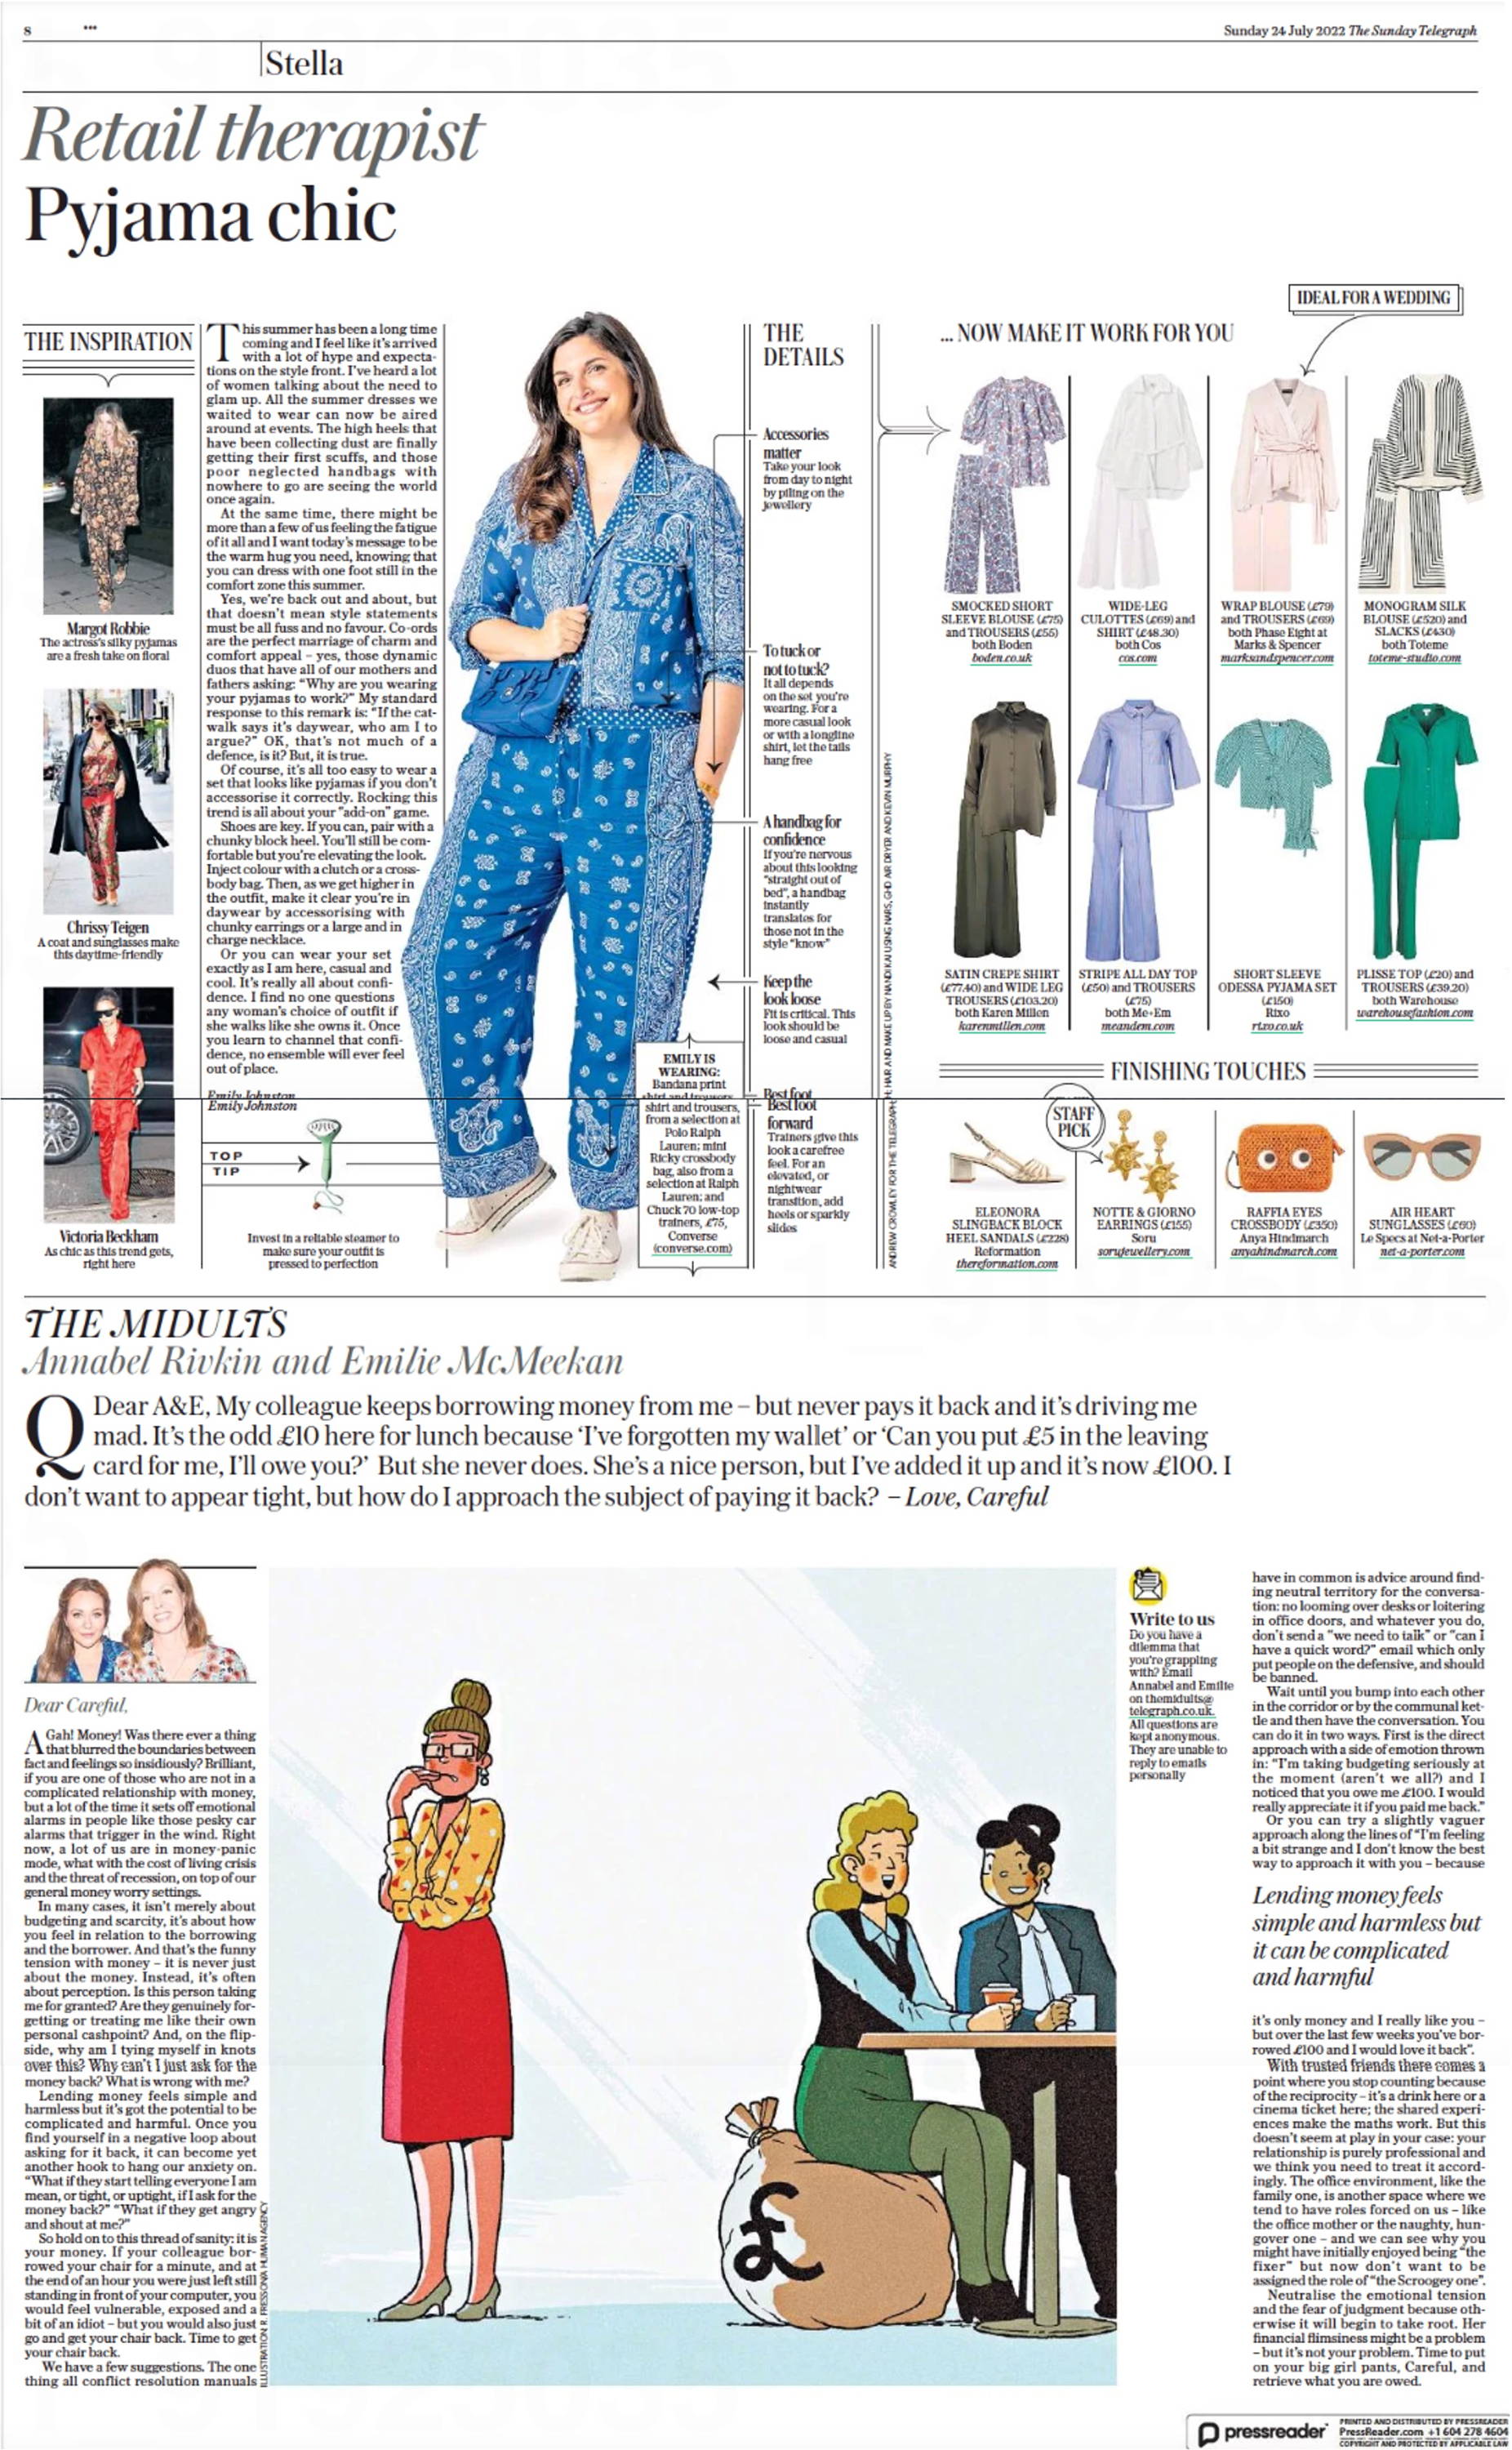 Sunday Telegraph Features Soru Jewellery Notte & Giorno Earrings.